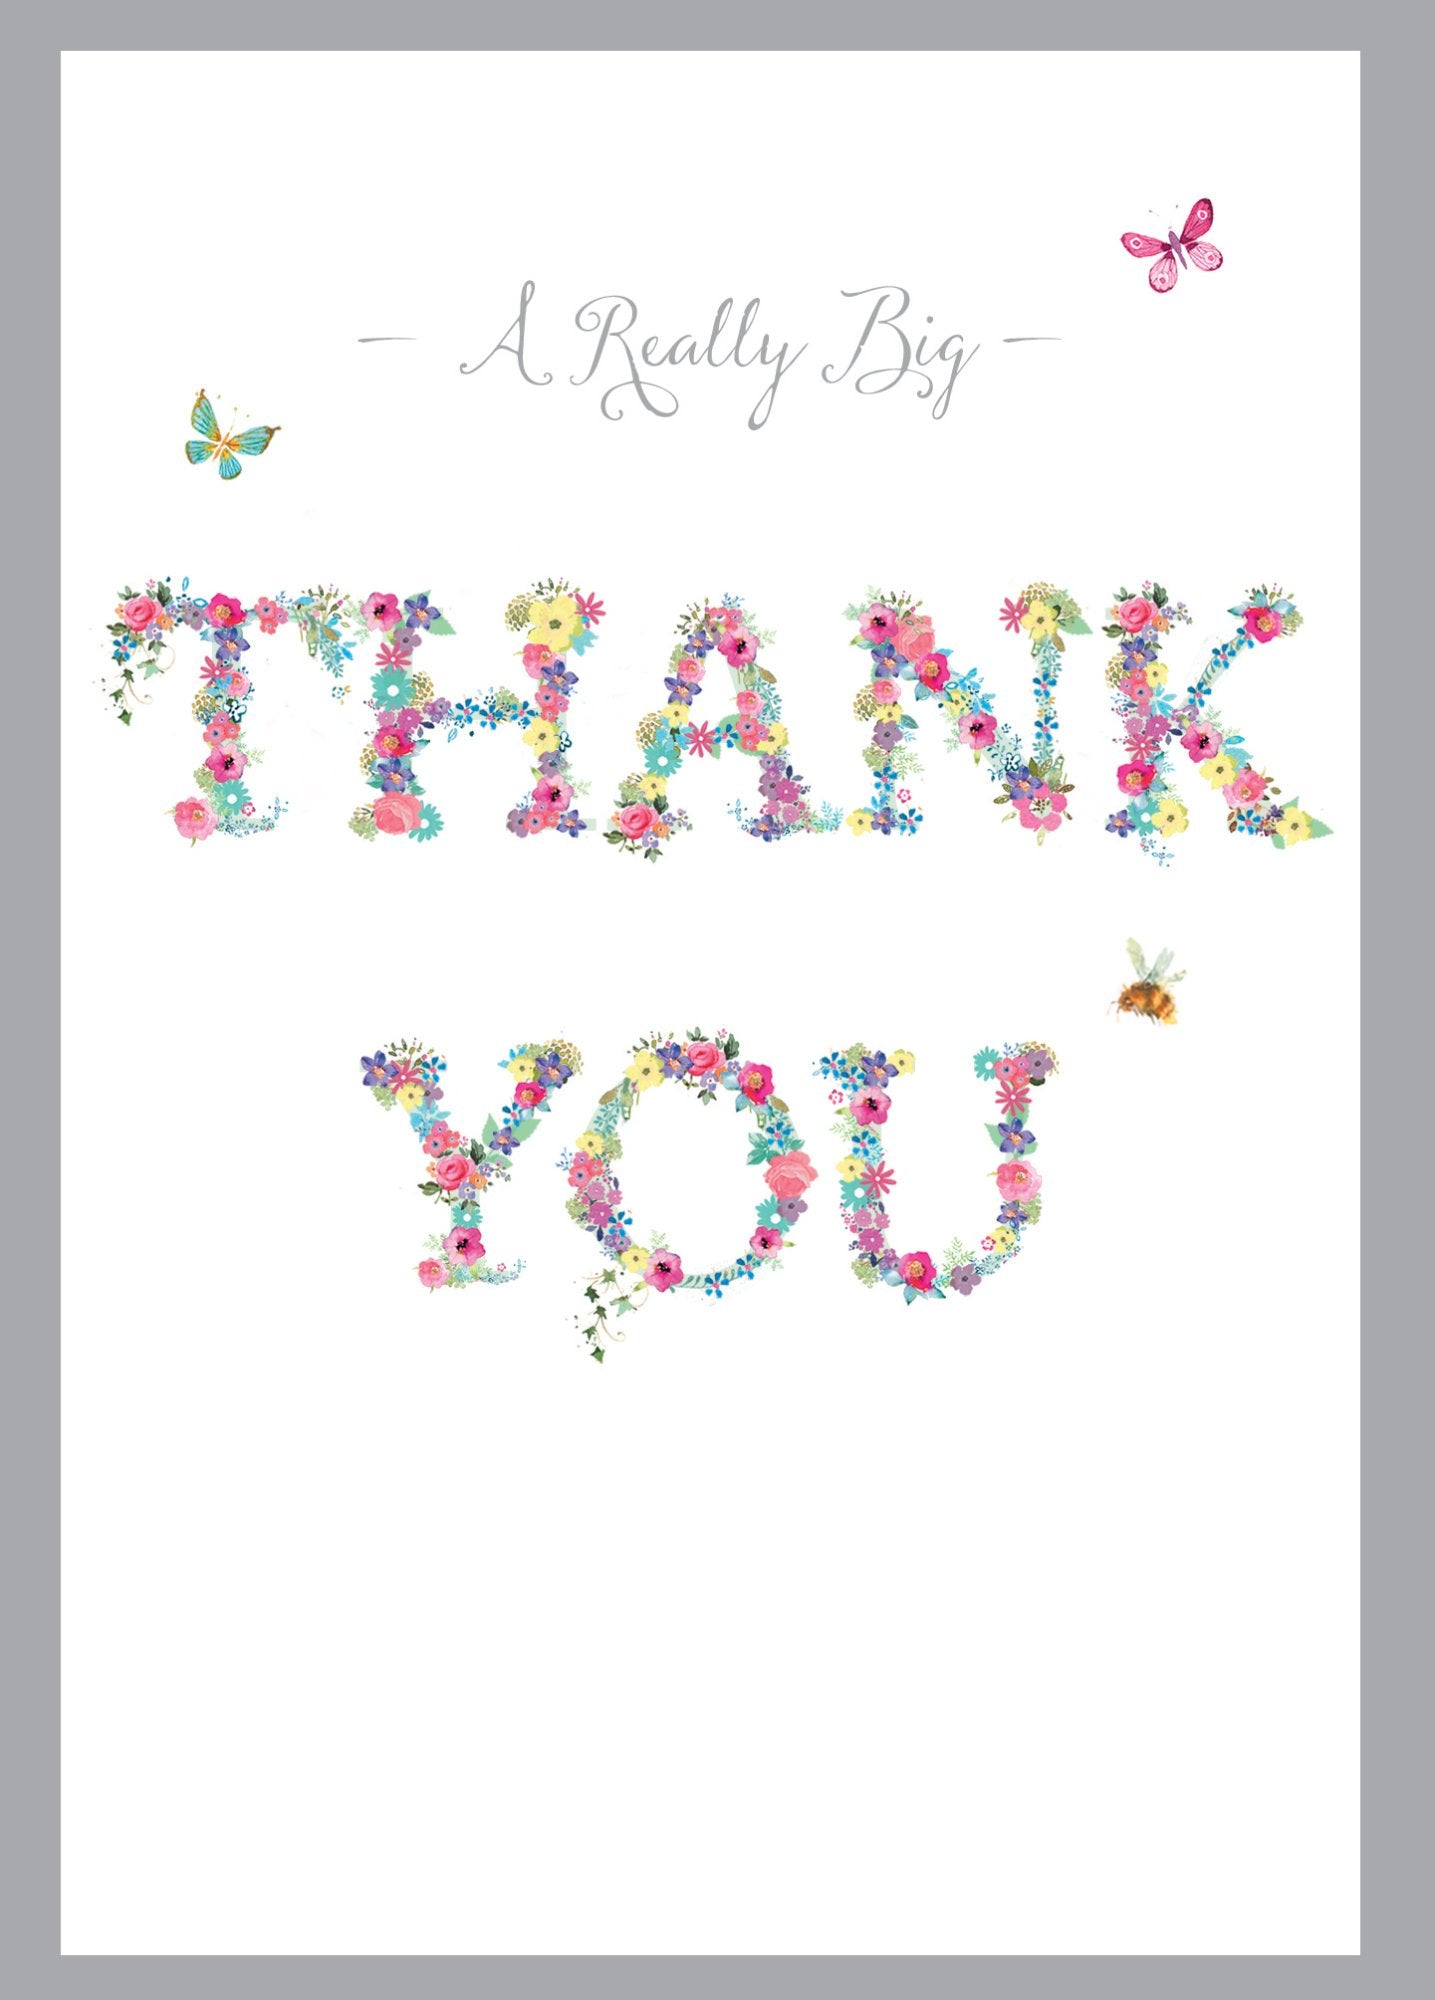 Photograph of A Really Big Thank You Greetings Card at Nicole's Shop